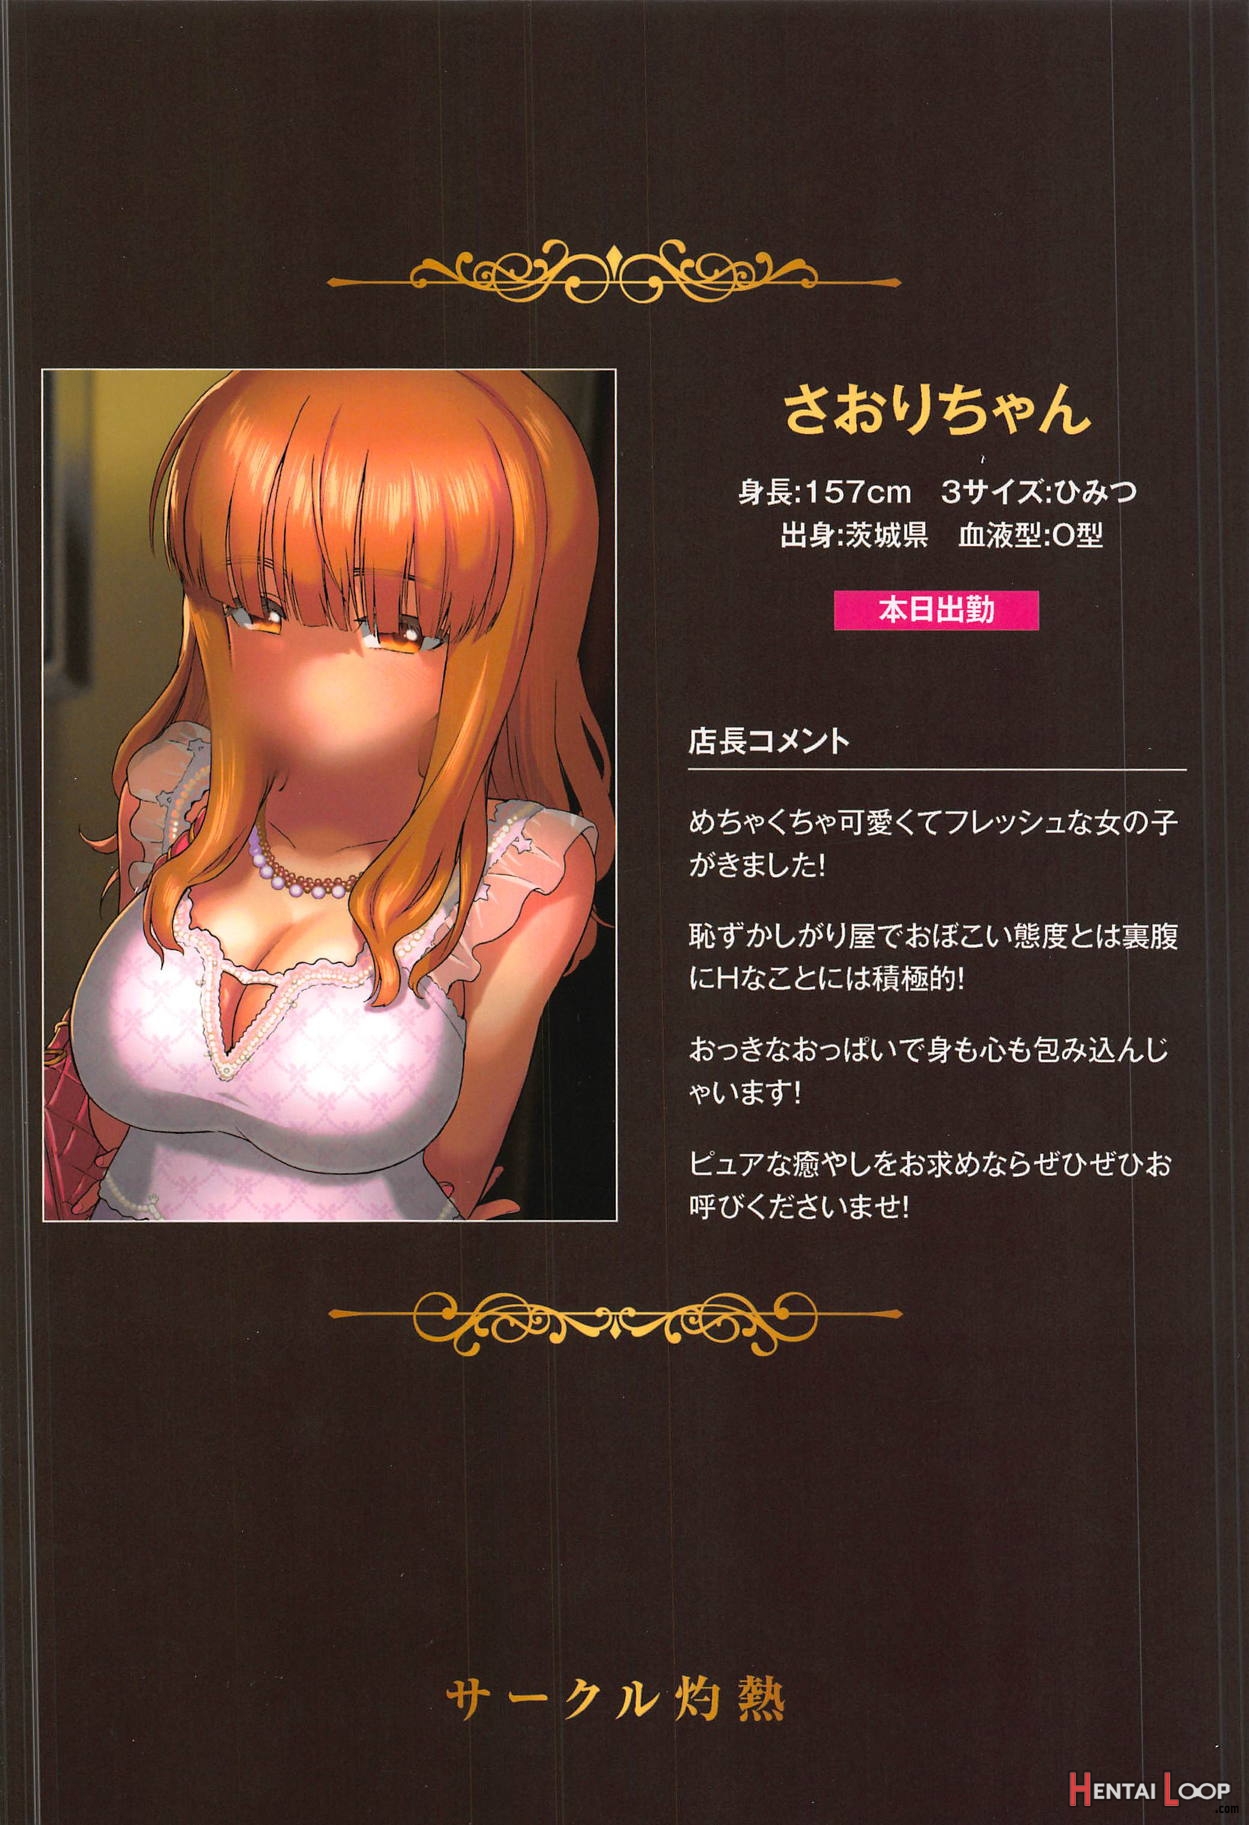 Saori Takebe Thought She Was Going To Lose Her Virginity By Working At A Brothel But It Turned Out To Be A Delivery Health Establishment That Does Not Allow Sex page 26